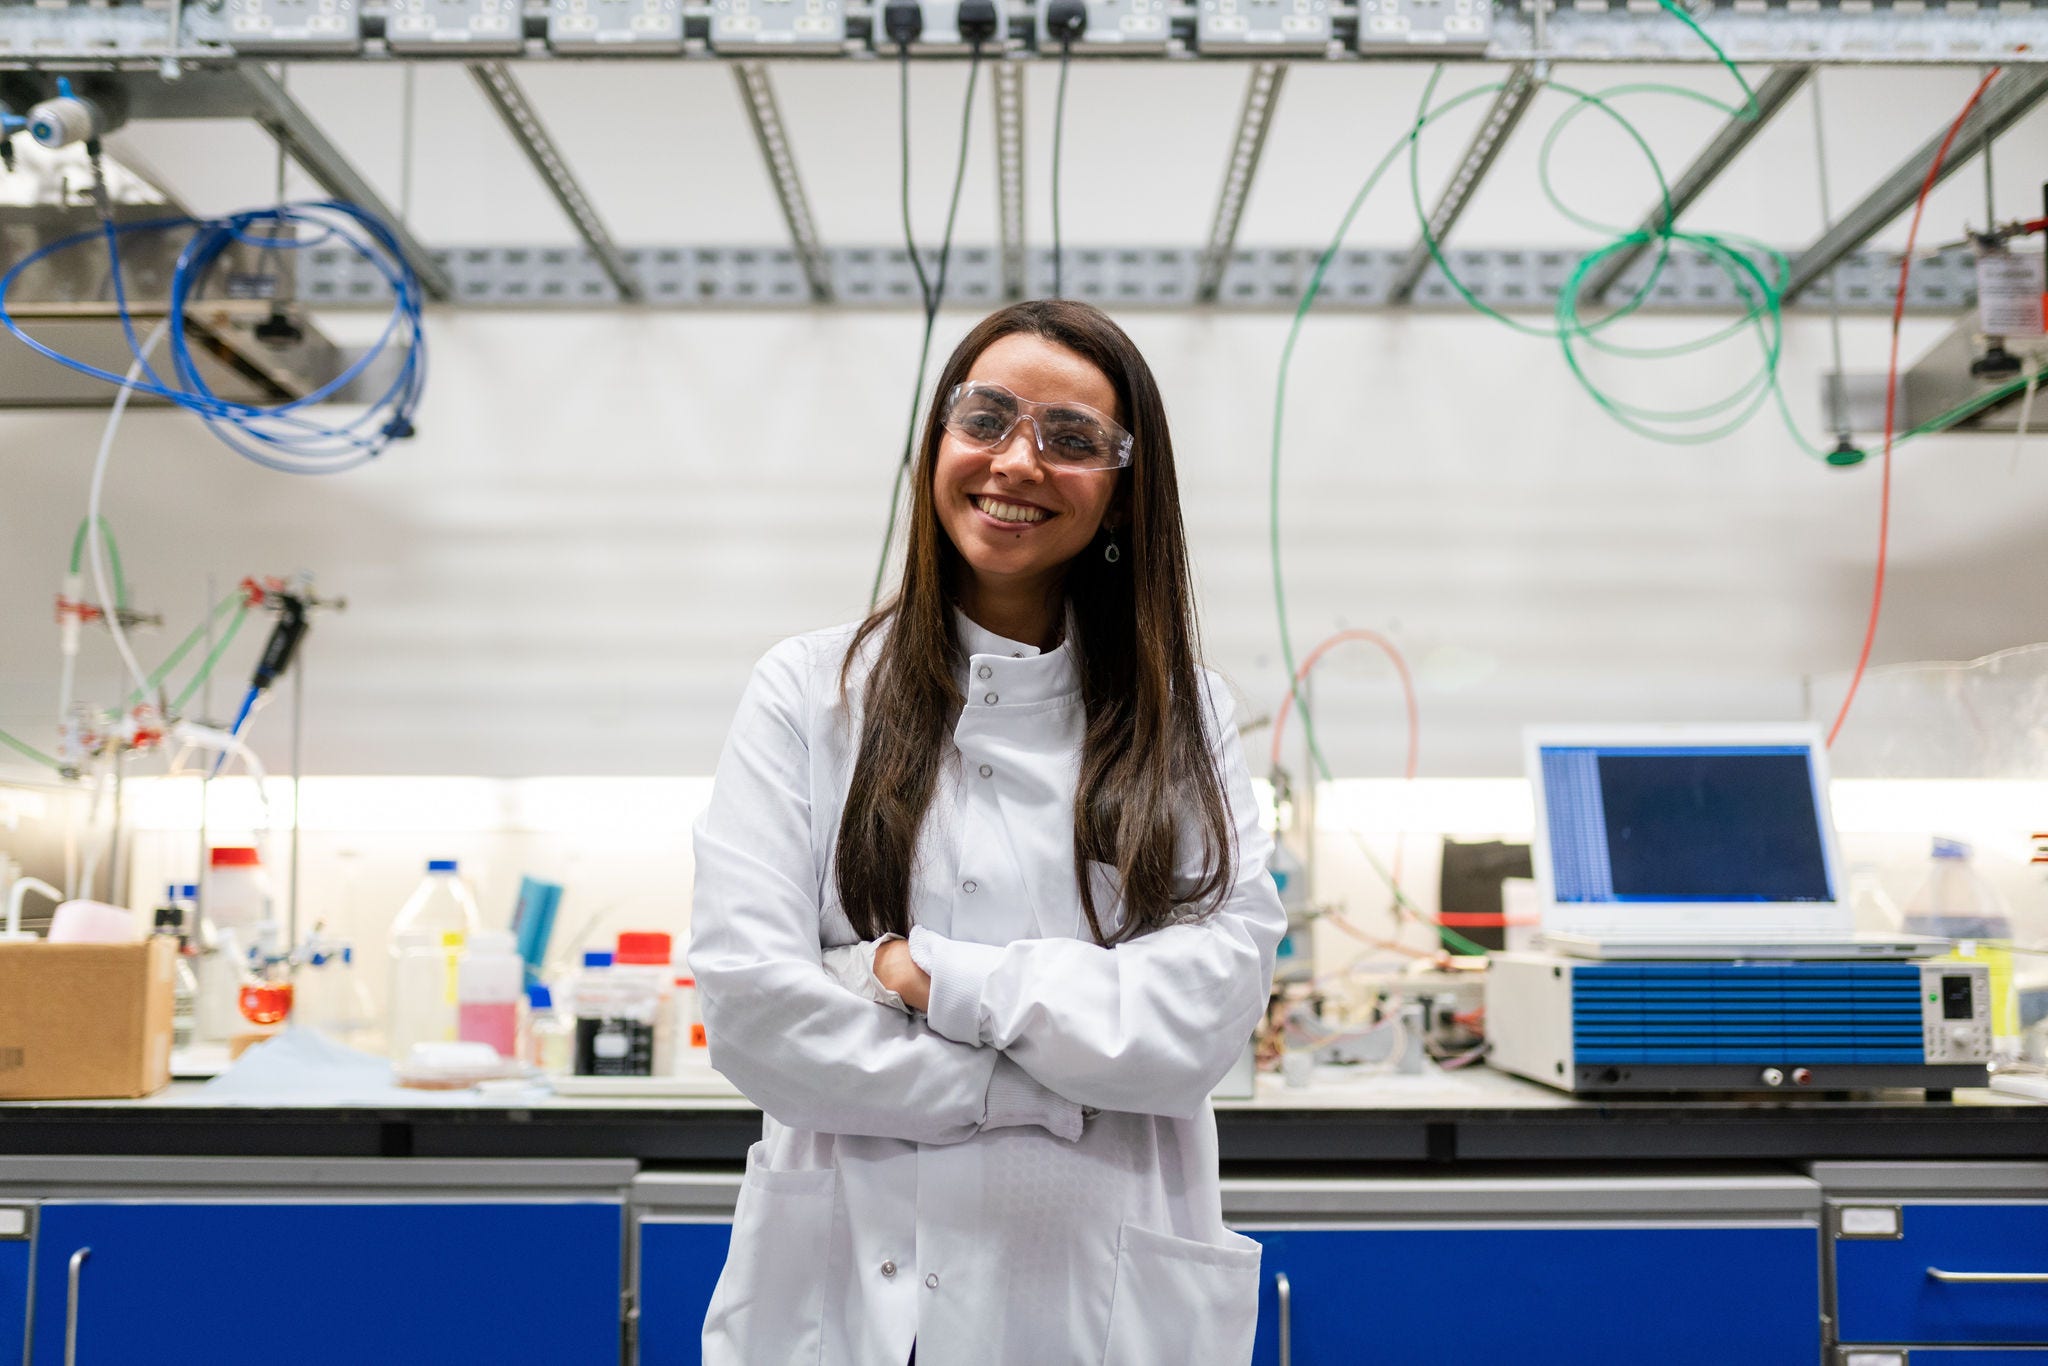 Smiling female engineering student wearing lab coat and safety glasses.